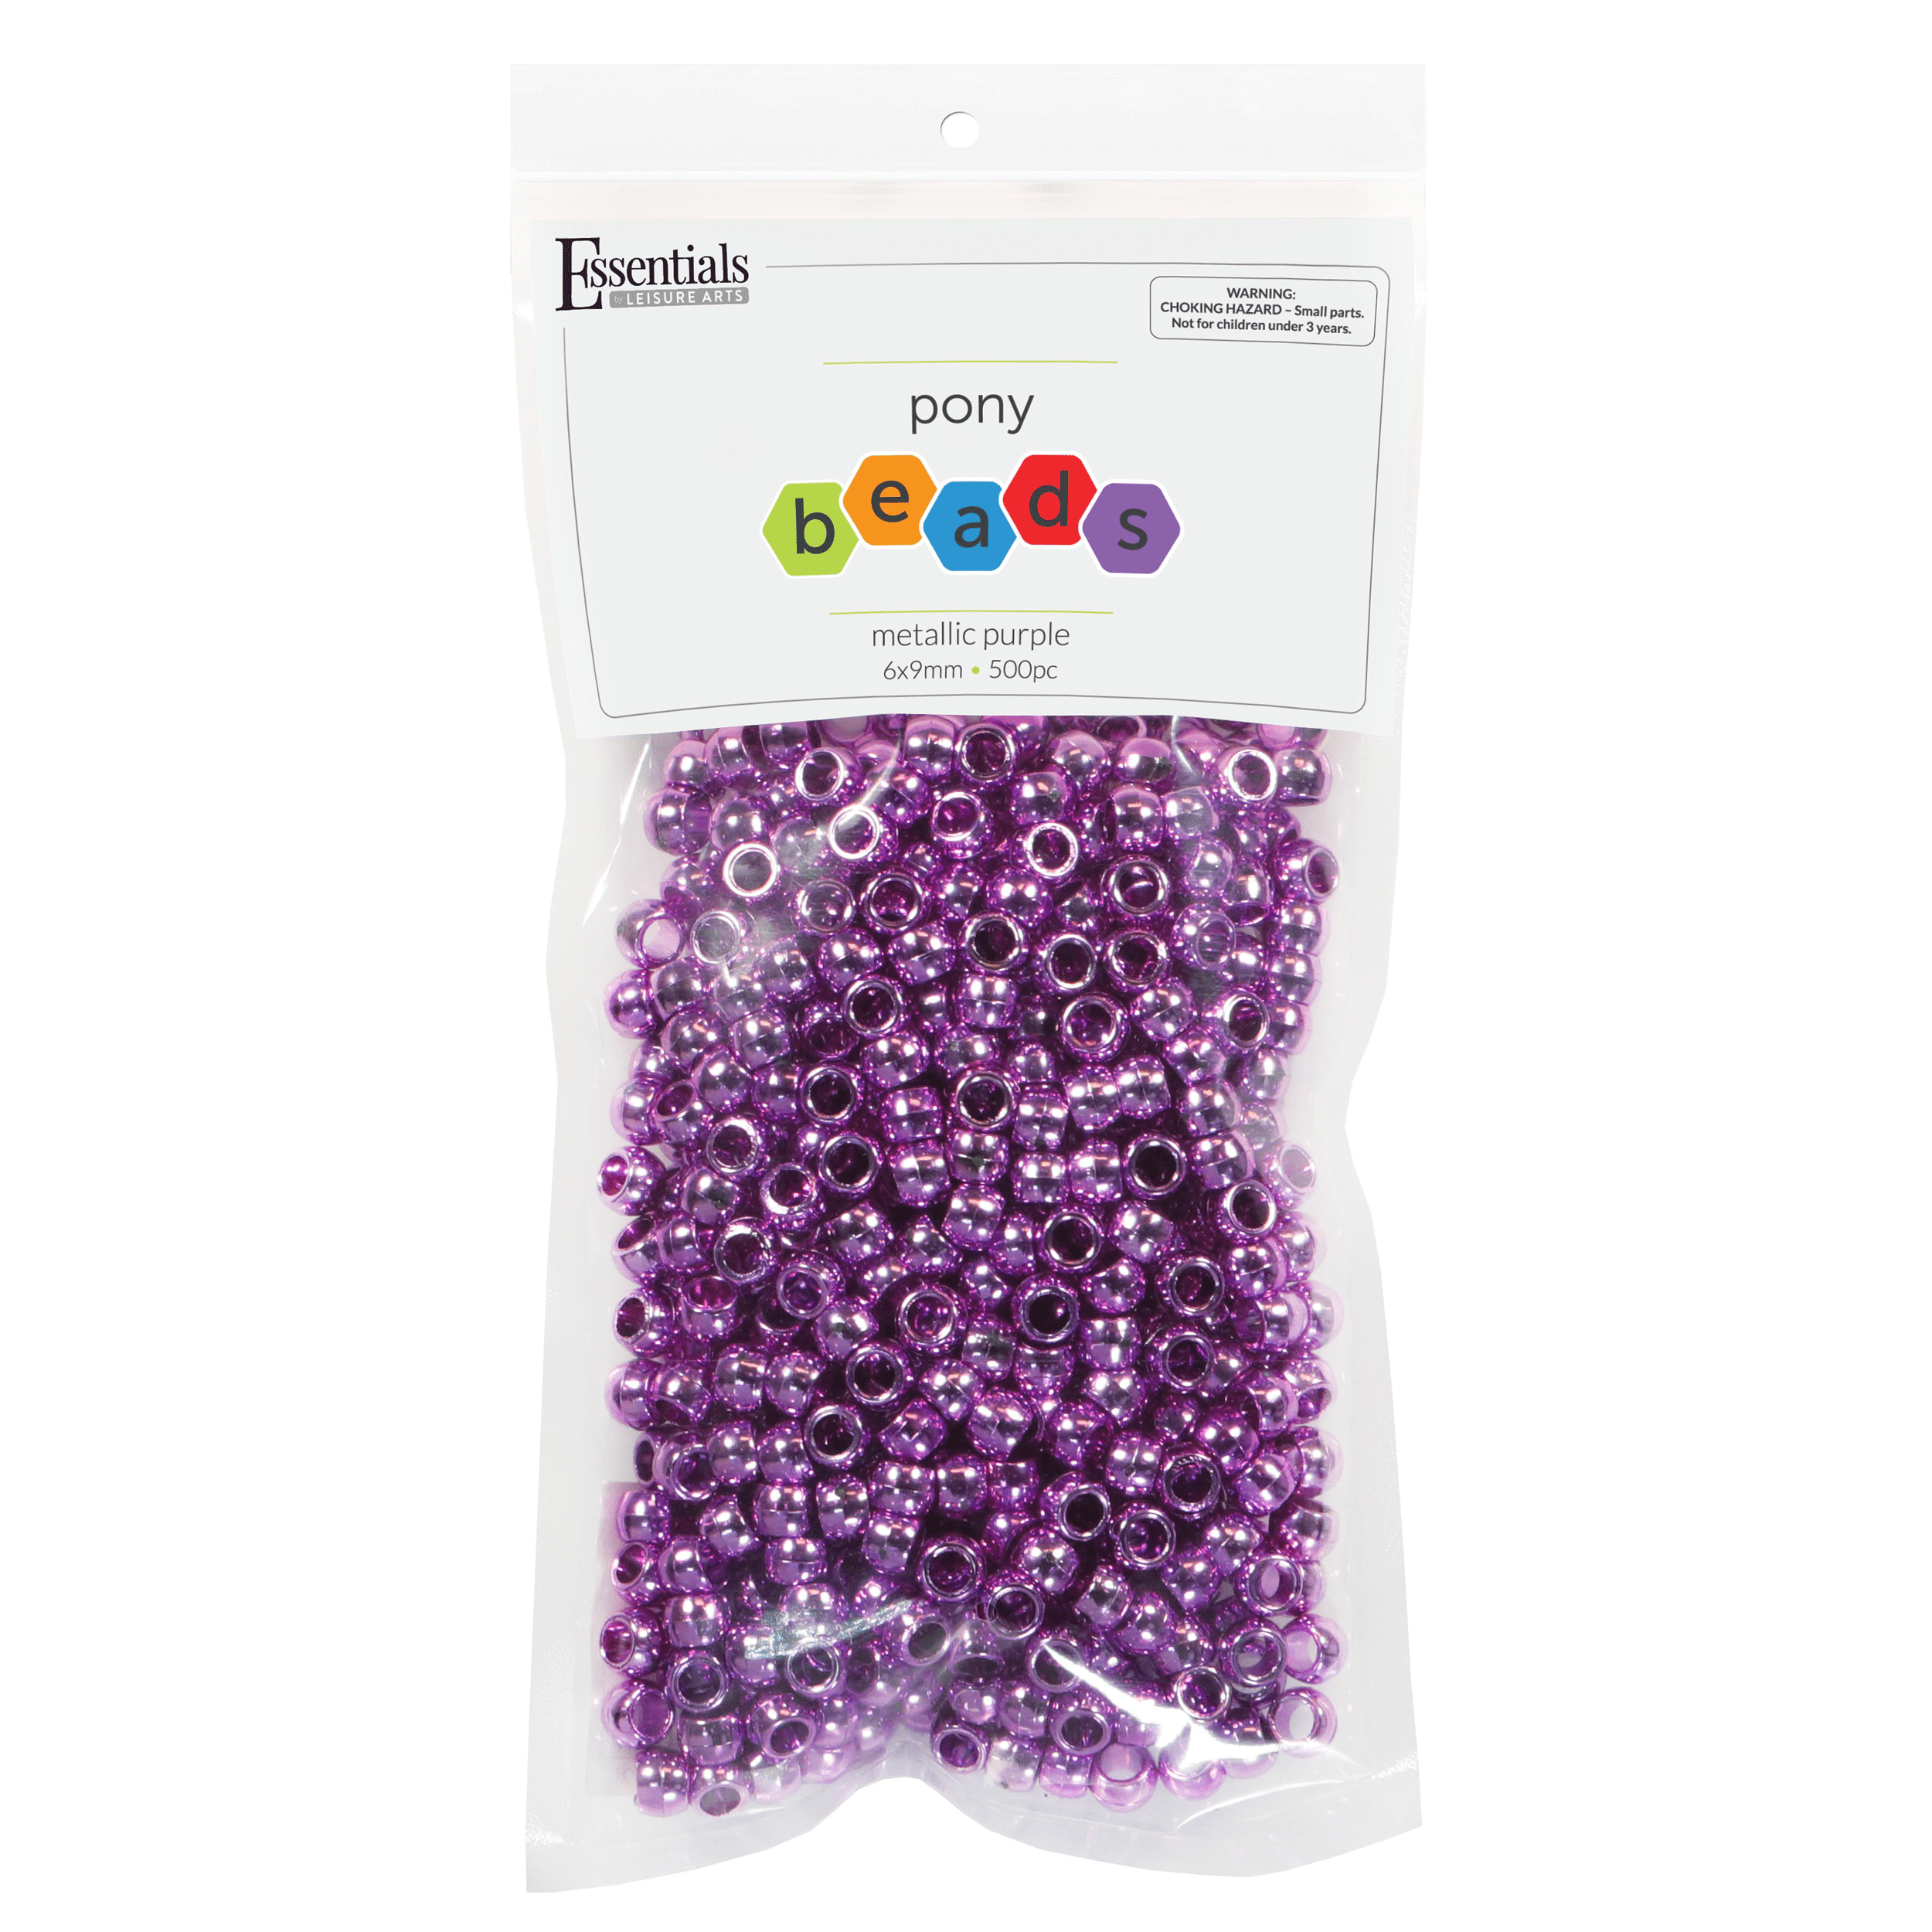 White Plastic Pony Beads Value Pack, 6mm x 8mm, 500 Pieces